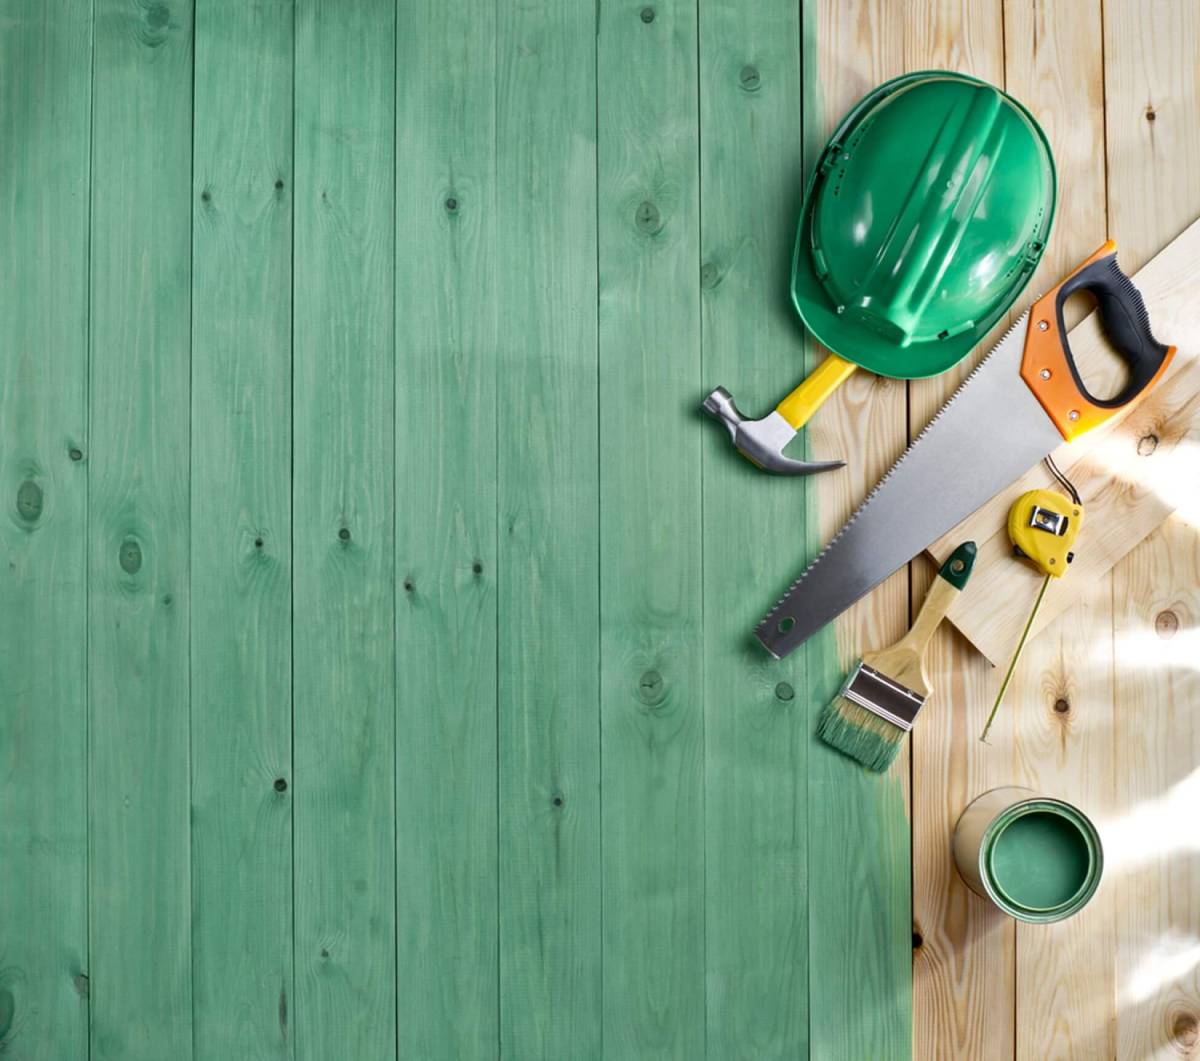 Green wood floor with a brush, paint, tools and helmet